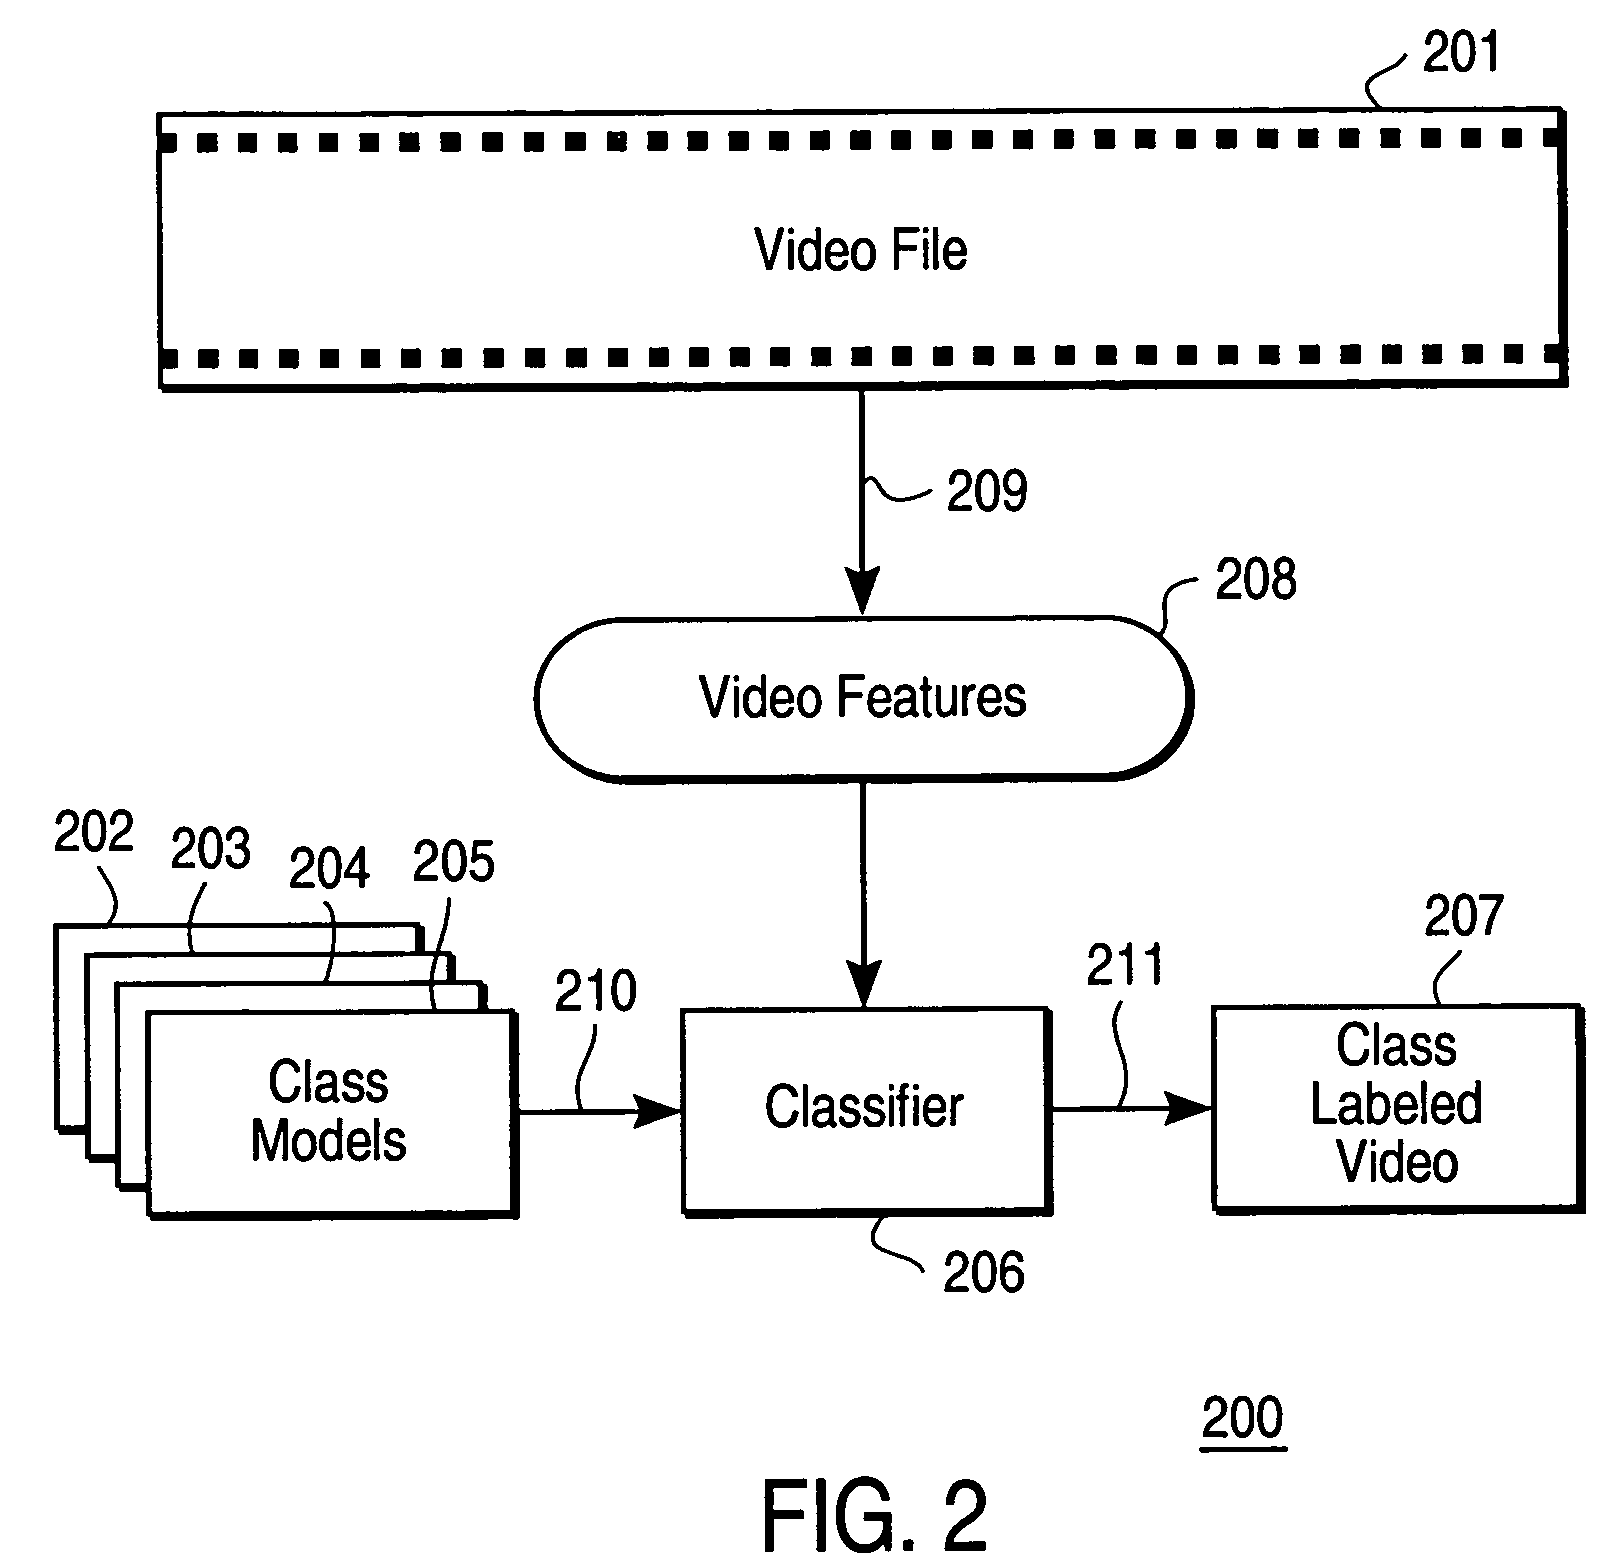 Methods and apparatuses for interactive similarity searching, retrieval and browsing of video